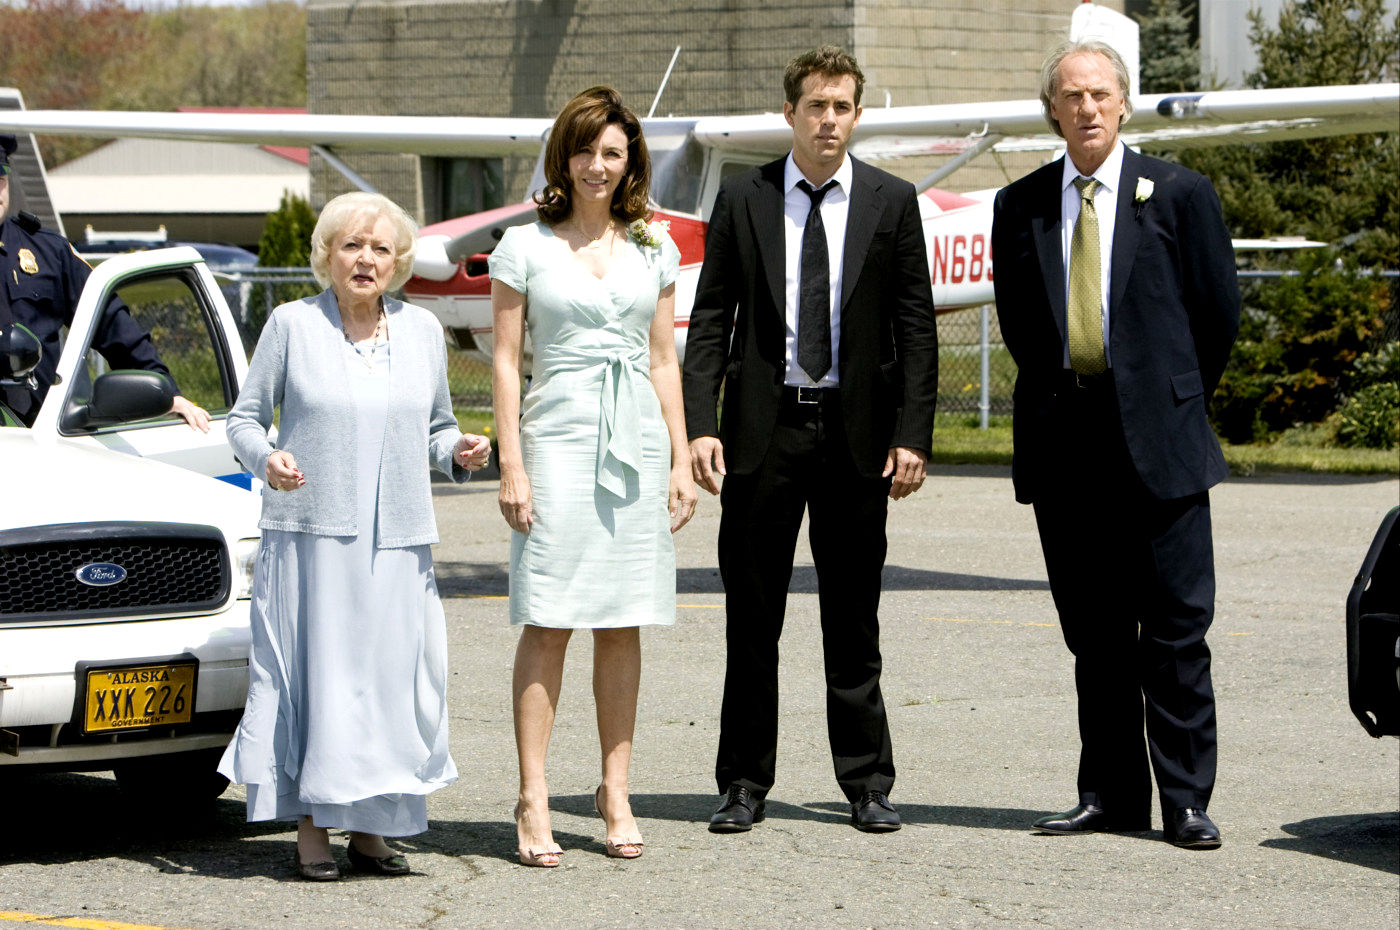 Betty White, Mary Steenburgen, Ryan Reynolds and Craig T. Nelson in Touchstone Pictures' The Proposal (2009). Photo credit by Kerry Hayes.